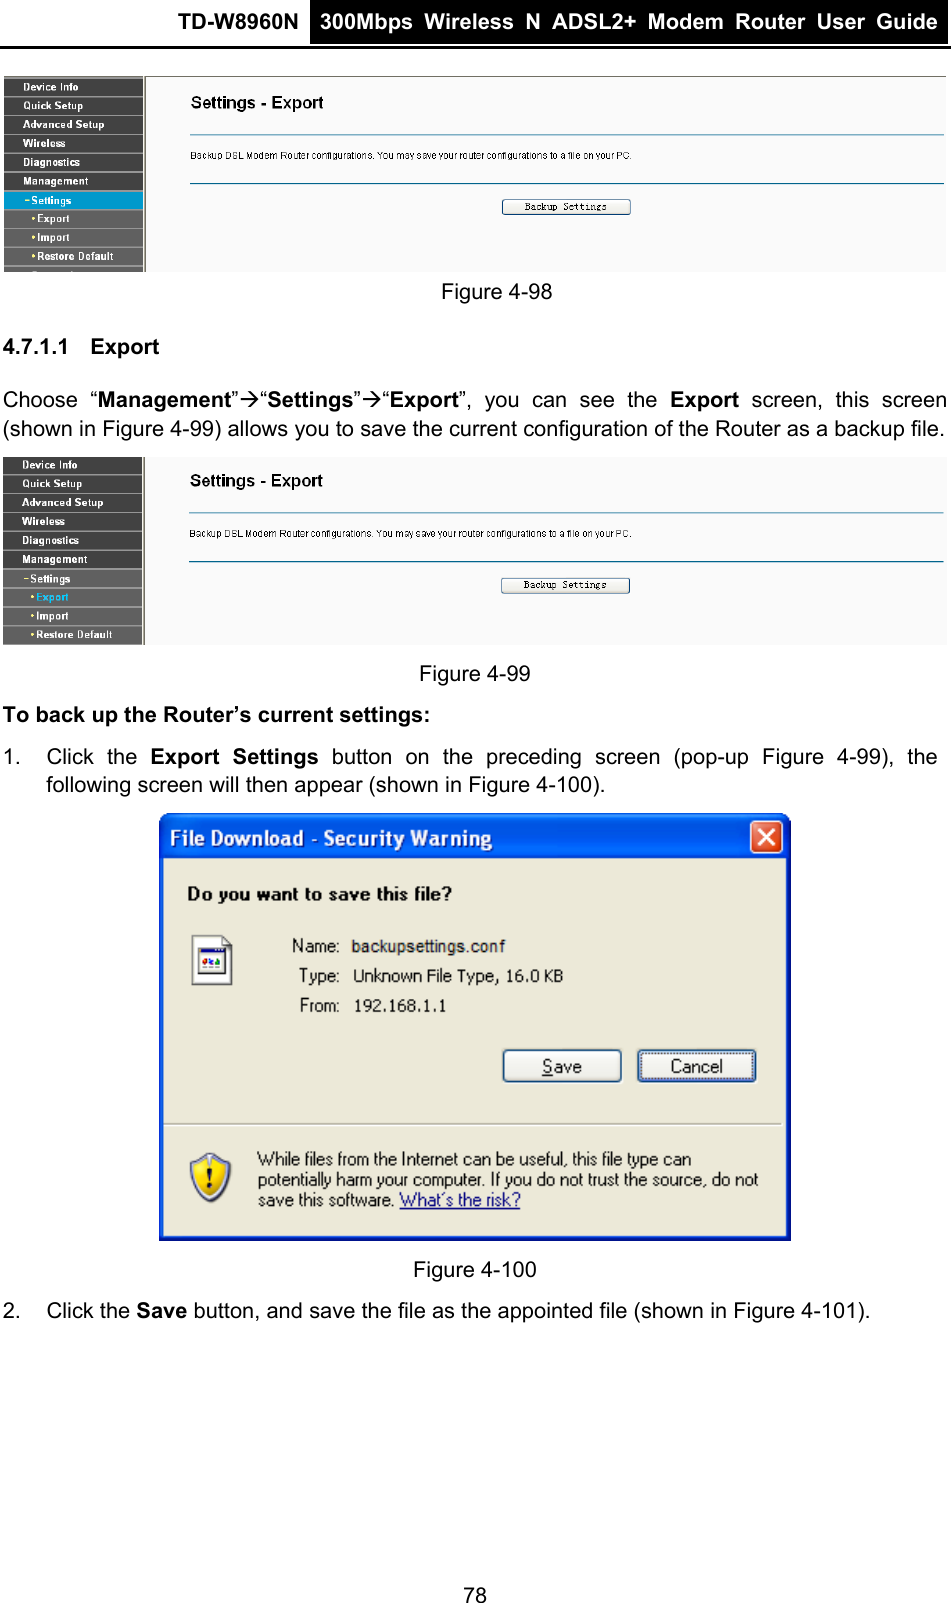 TD-W8960N  300Mbps Wireless N ADSL2+ Modem Router User Guide   Figure 4-98 4.7.1.1  Export Choose “Management”“Settings”“Export”, you can see the Export screen, this screen (shown in Figure 4-99) allows you to save the current configuration of the Router as a backup file.  Figure 4-99 To back up the Router’s current settings: 1. Click the Export Settings button on the preceding screen (pop-up Figure 4-99), the following screen will then appear (shown in Figure 4-100).  Figure 4-100 2. Click the Save button, and save the file as the appointed file (shown in Figure 4-101). 78 